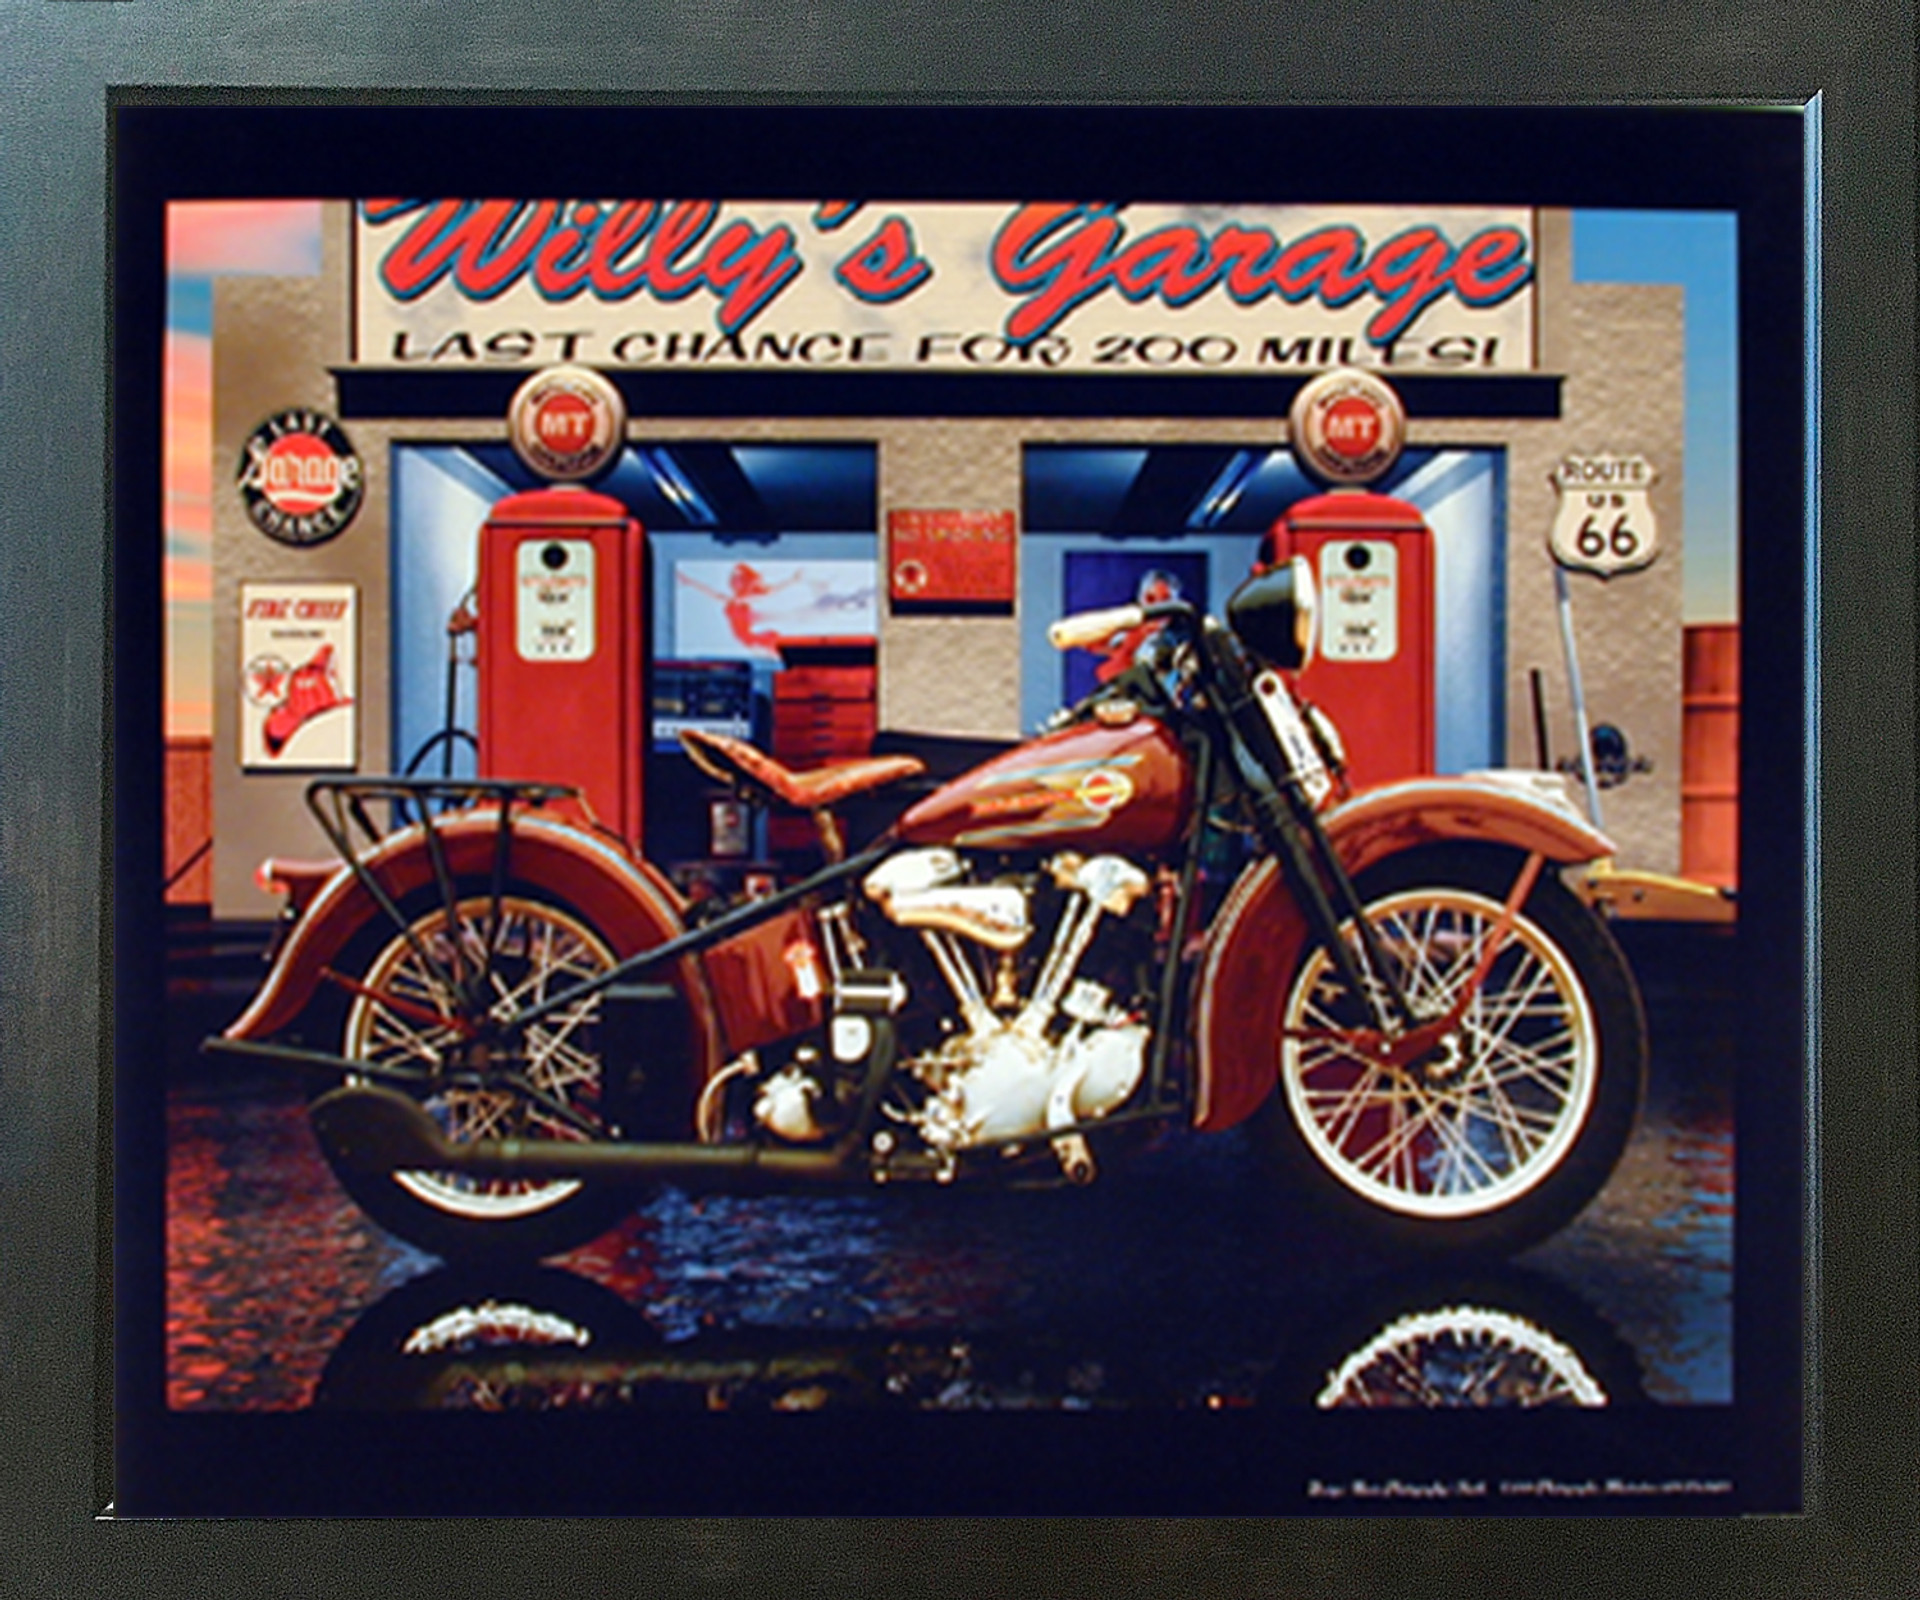 Harley Davidson Willy's Garage Vintage Motorcycle Wall Home Decor